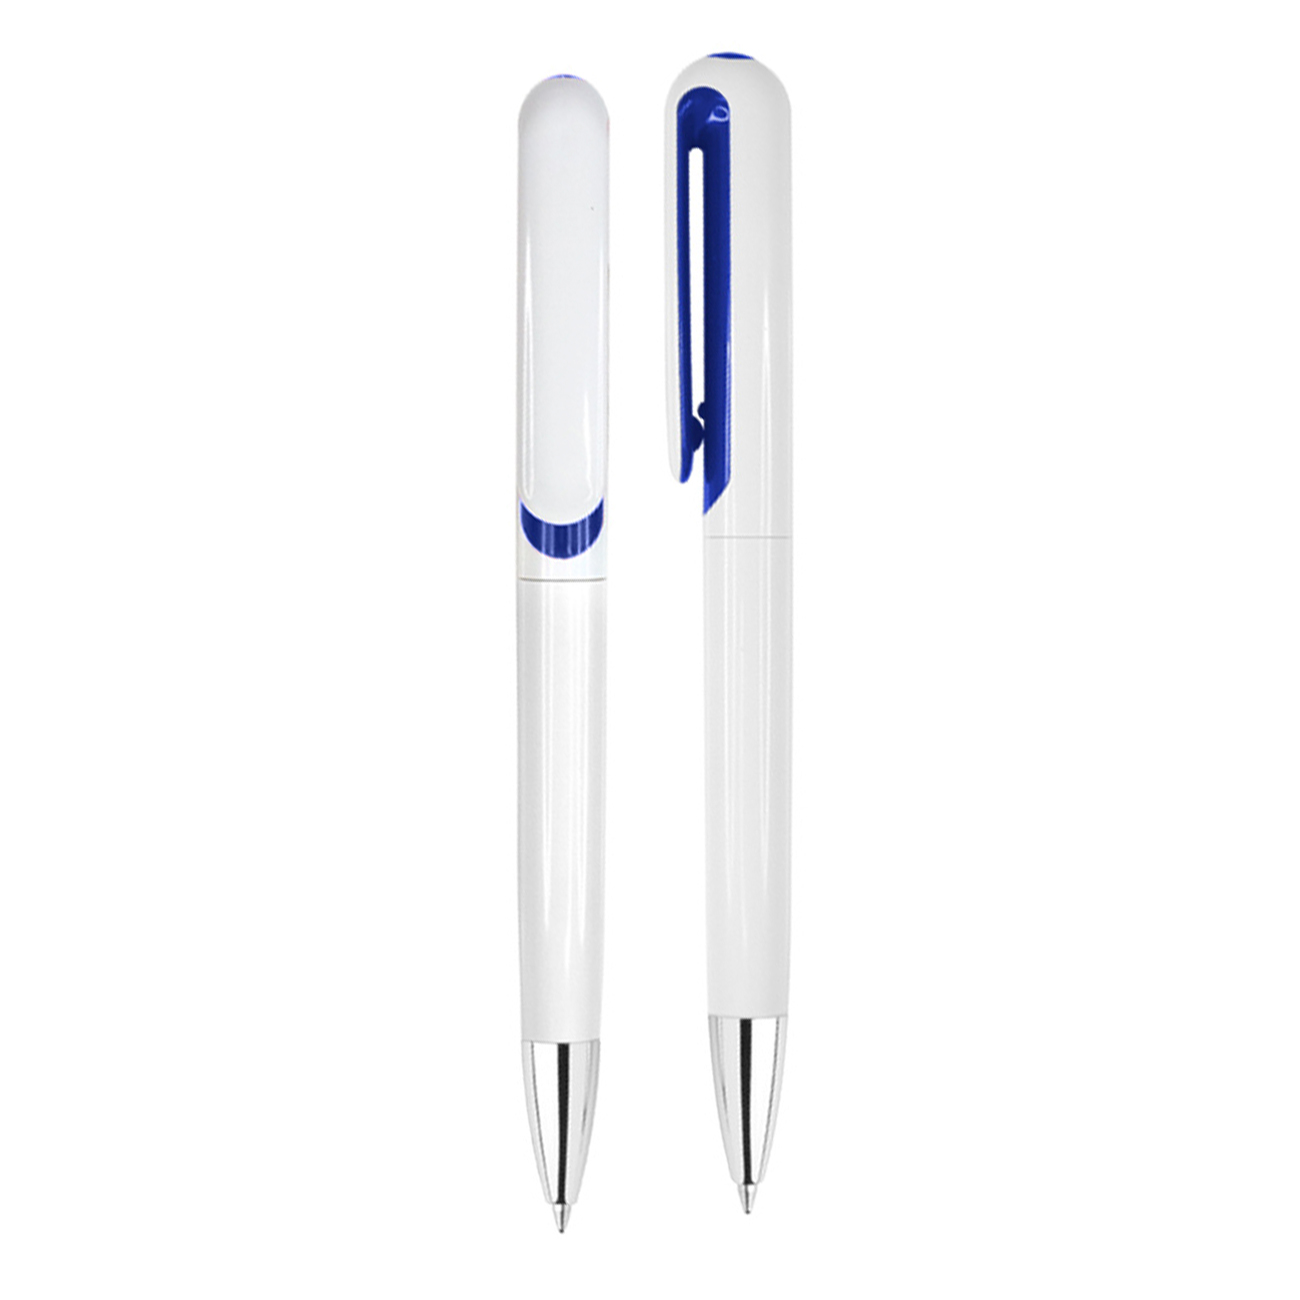 BOLIGRAFO FINE TOUCH AZUL - Cod 5410 - NOBOBIZ, Promotional Items, Material, Products